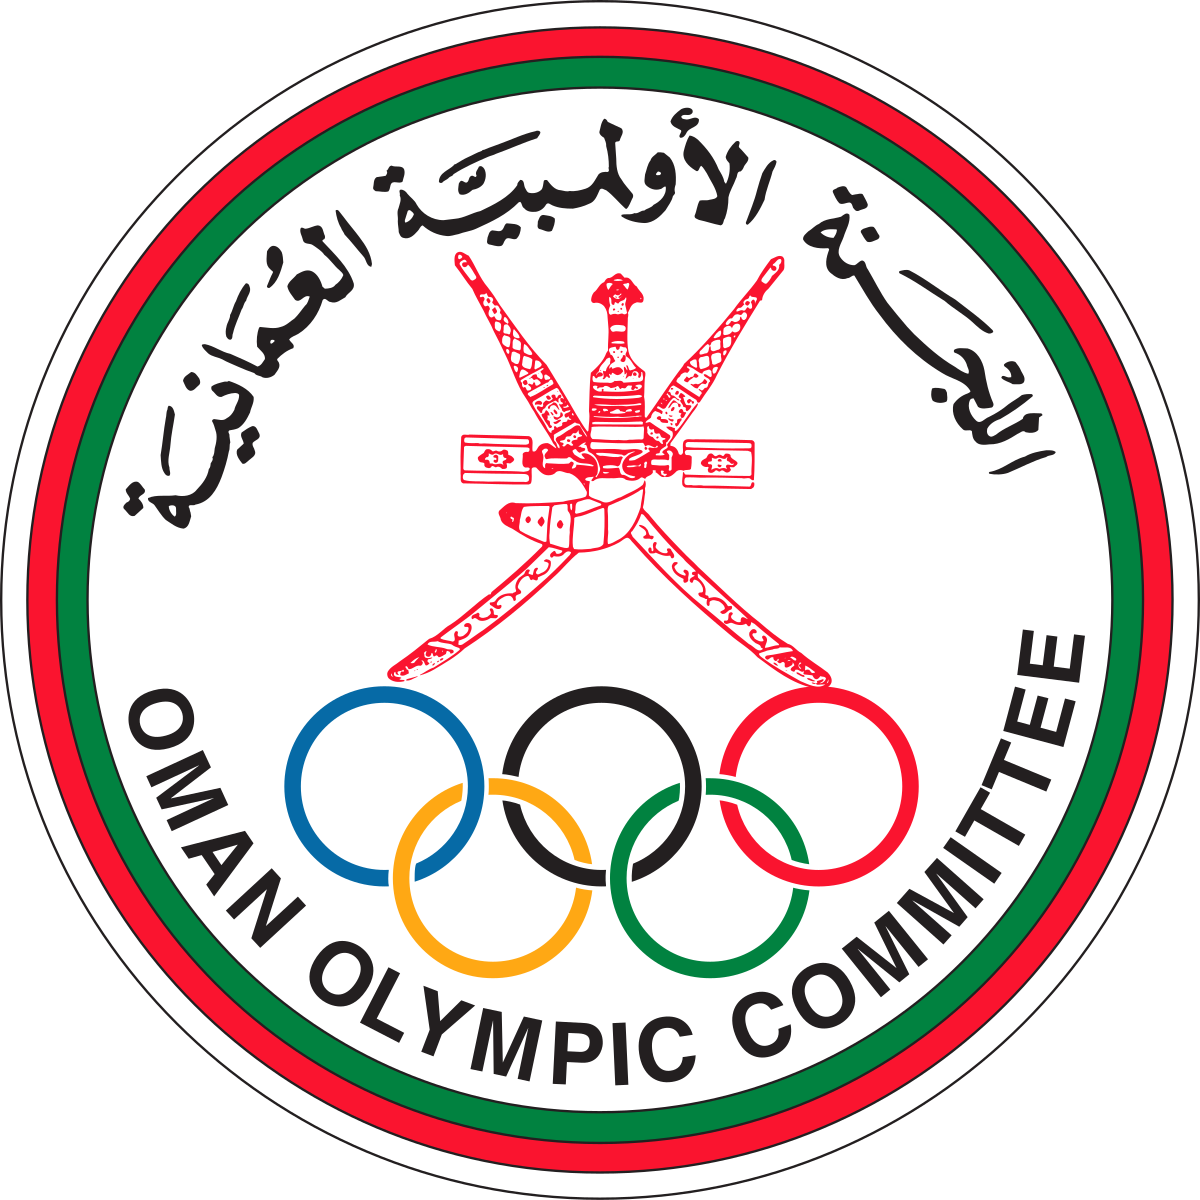 The Oman Olympic Committee have held a finance course ©OOC